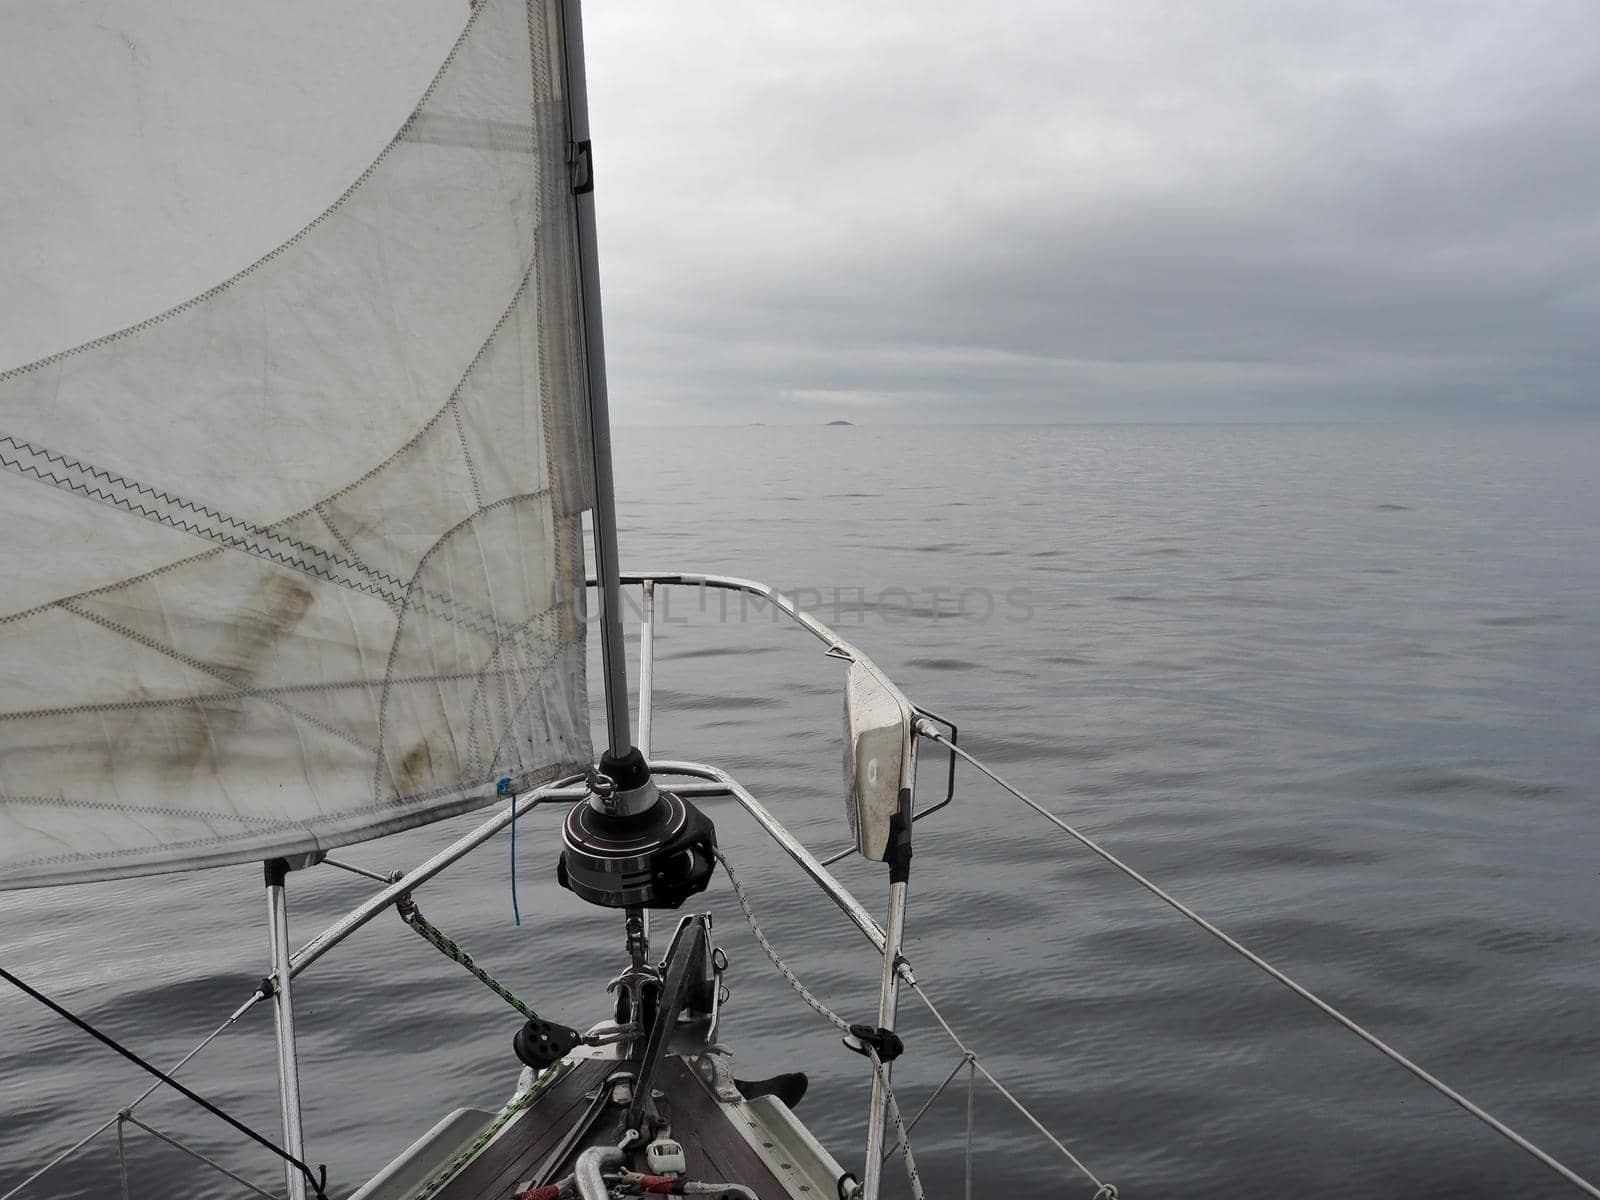 View from bow of yacht sailing in calm water towards small islands under heavy cloudy sky